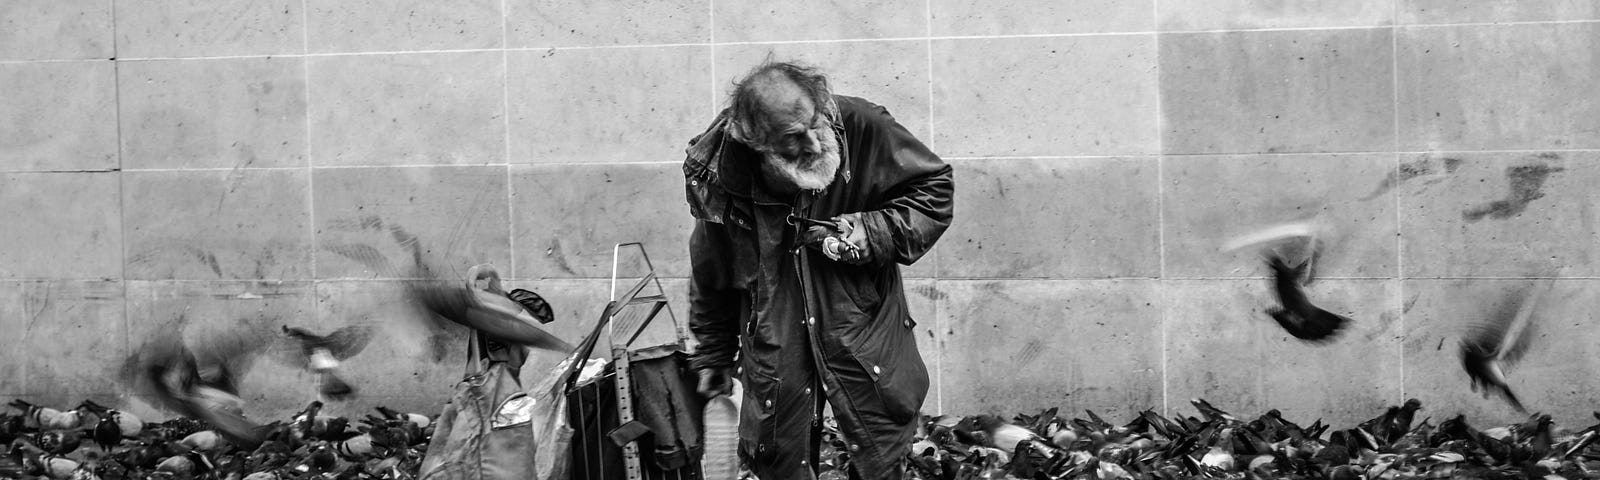 black and white image of homeless man among many pigeons